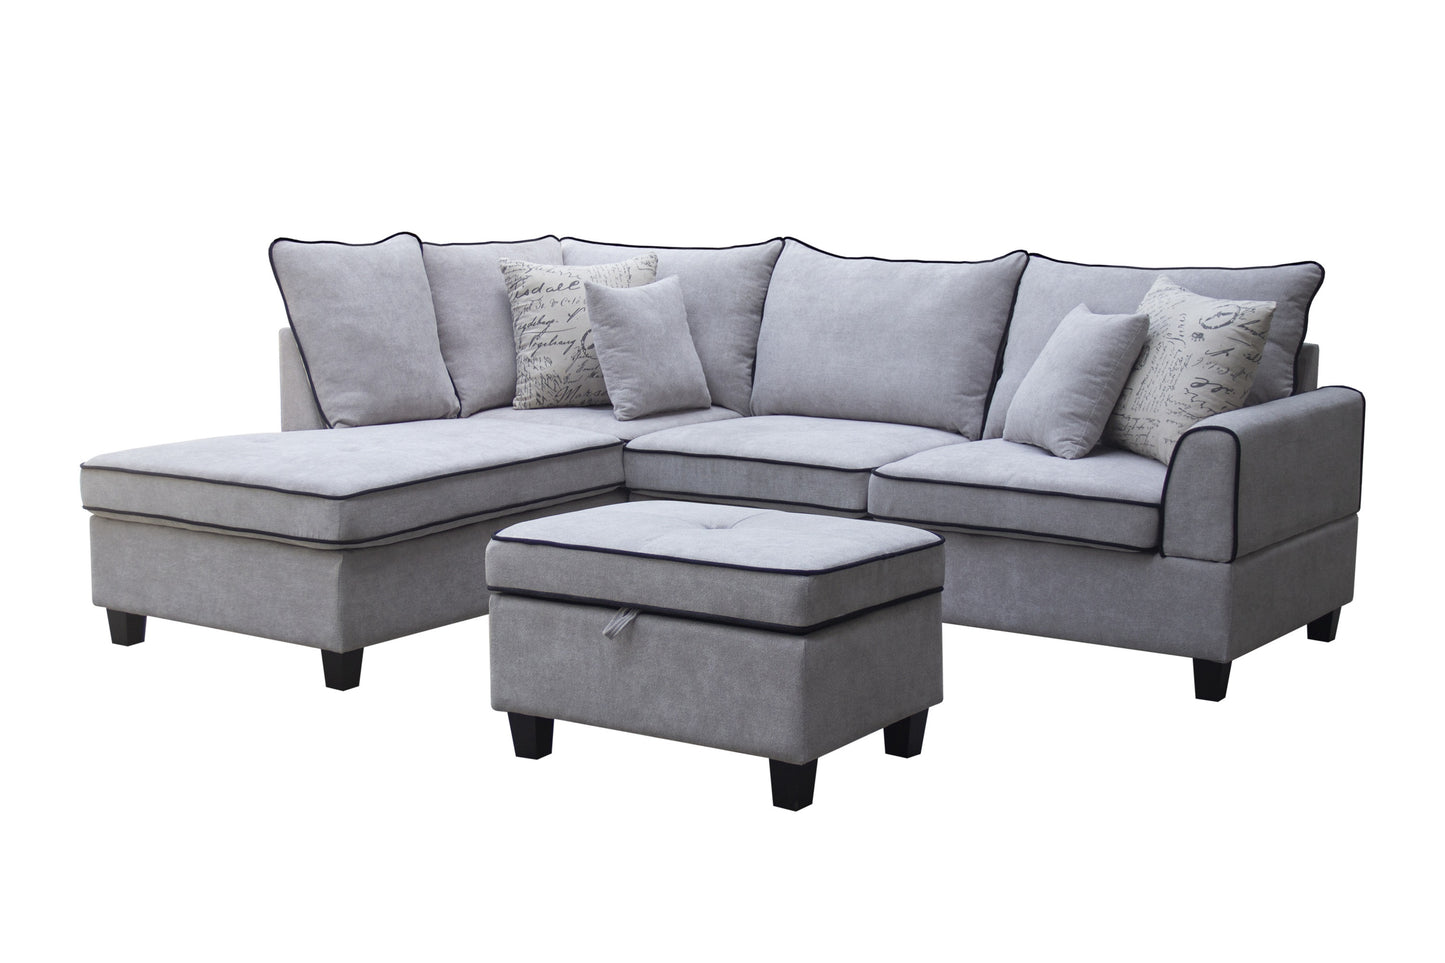 1st Choice Harmony Light Gray Fabric Sectional Sofa with Left-Facing Chaise